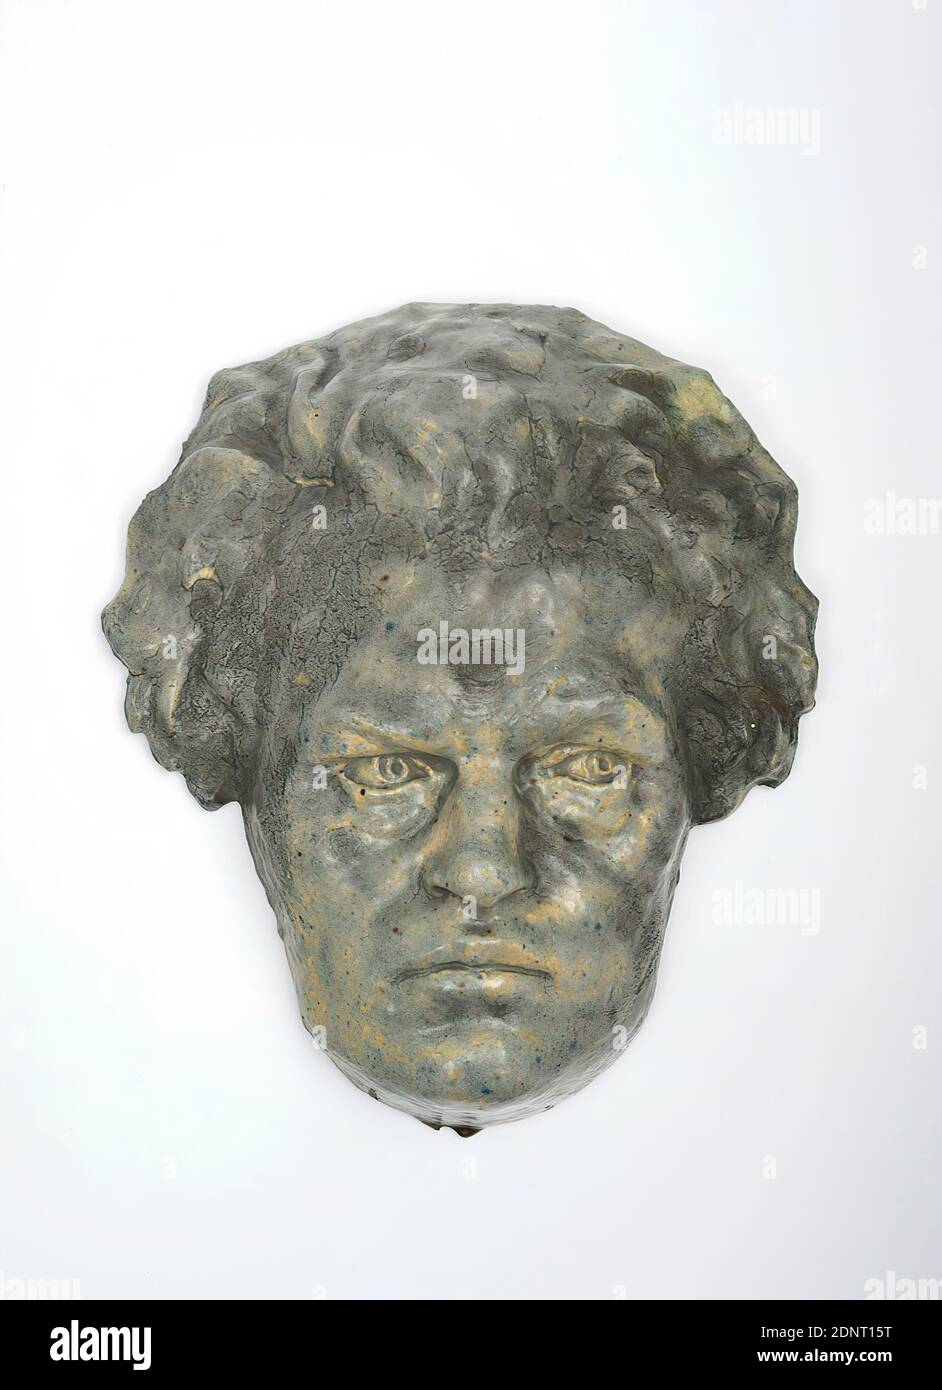 Niels Hansen-Jacobsen, self-portrait mask, Acquired by the artist at the world exhibition in Paris in 1900, stoneware, glazed, Total: Height: 32,20 cm; Width: 27,80 cm; Depth: 9,40 cm, monogrammed, inscribed and dated: on the reverse: Hans. Jacobsen, and ligated: NHJ 97. next to the initials a lettering that has become incomplete and illegible due to the break, sculptures, sculptures, self-portrait, artist, head picture, portrait, self-portrait of a sculptor, art nouveau Stock Photo